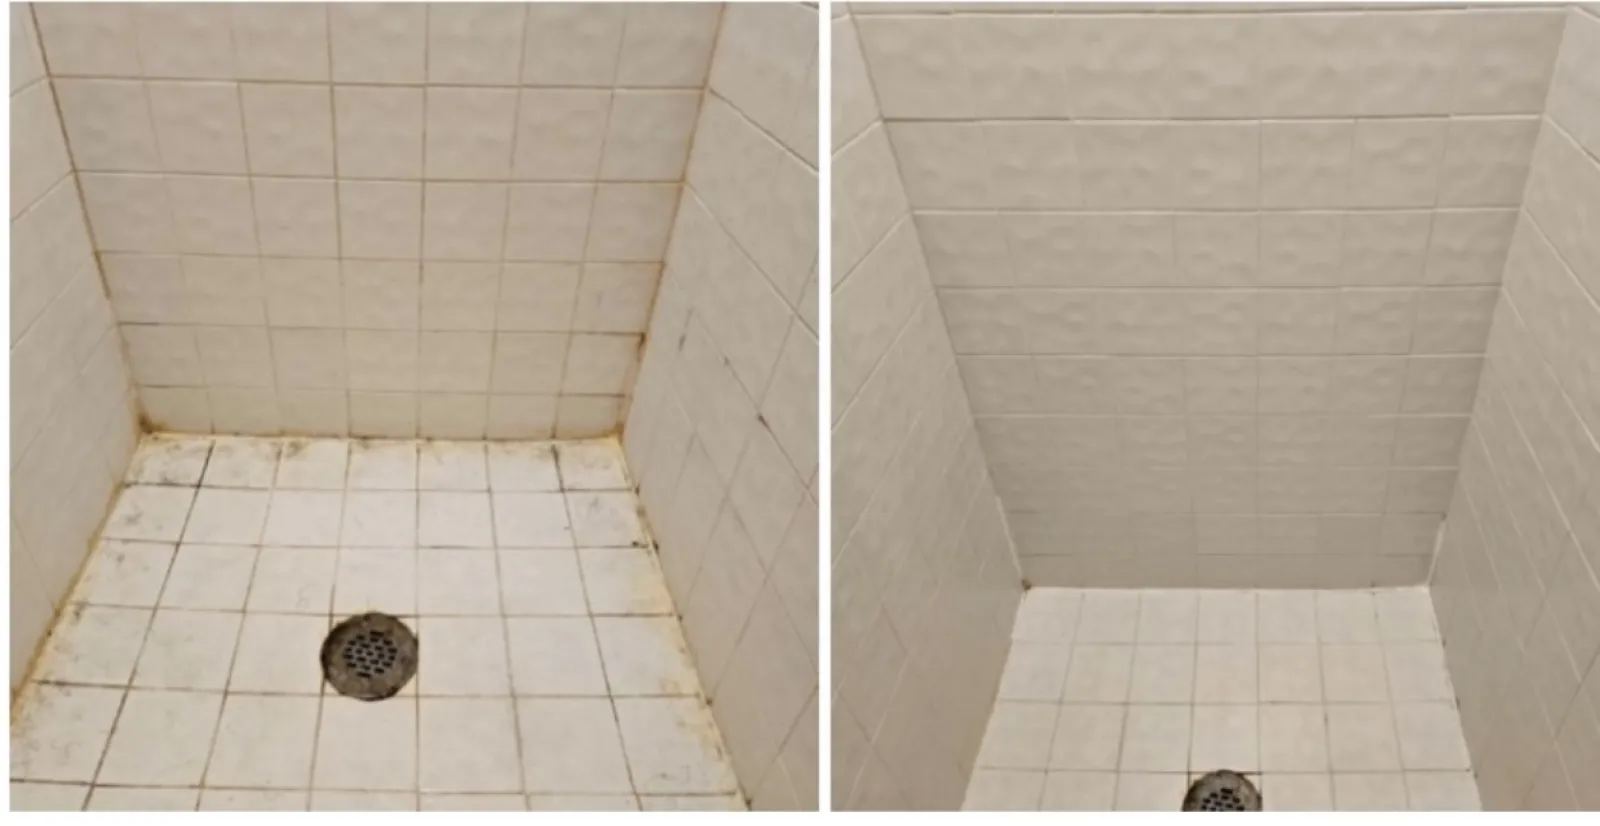 a room with a tile floor and a hole in the wall